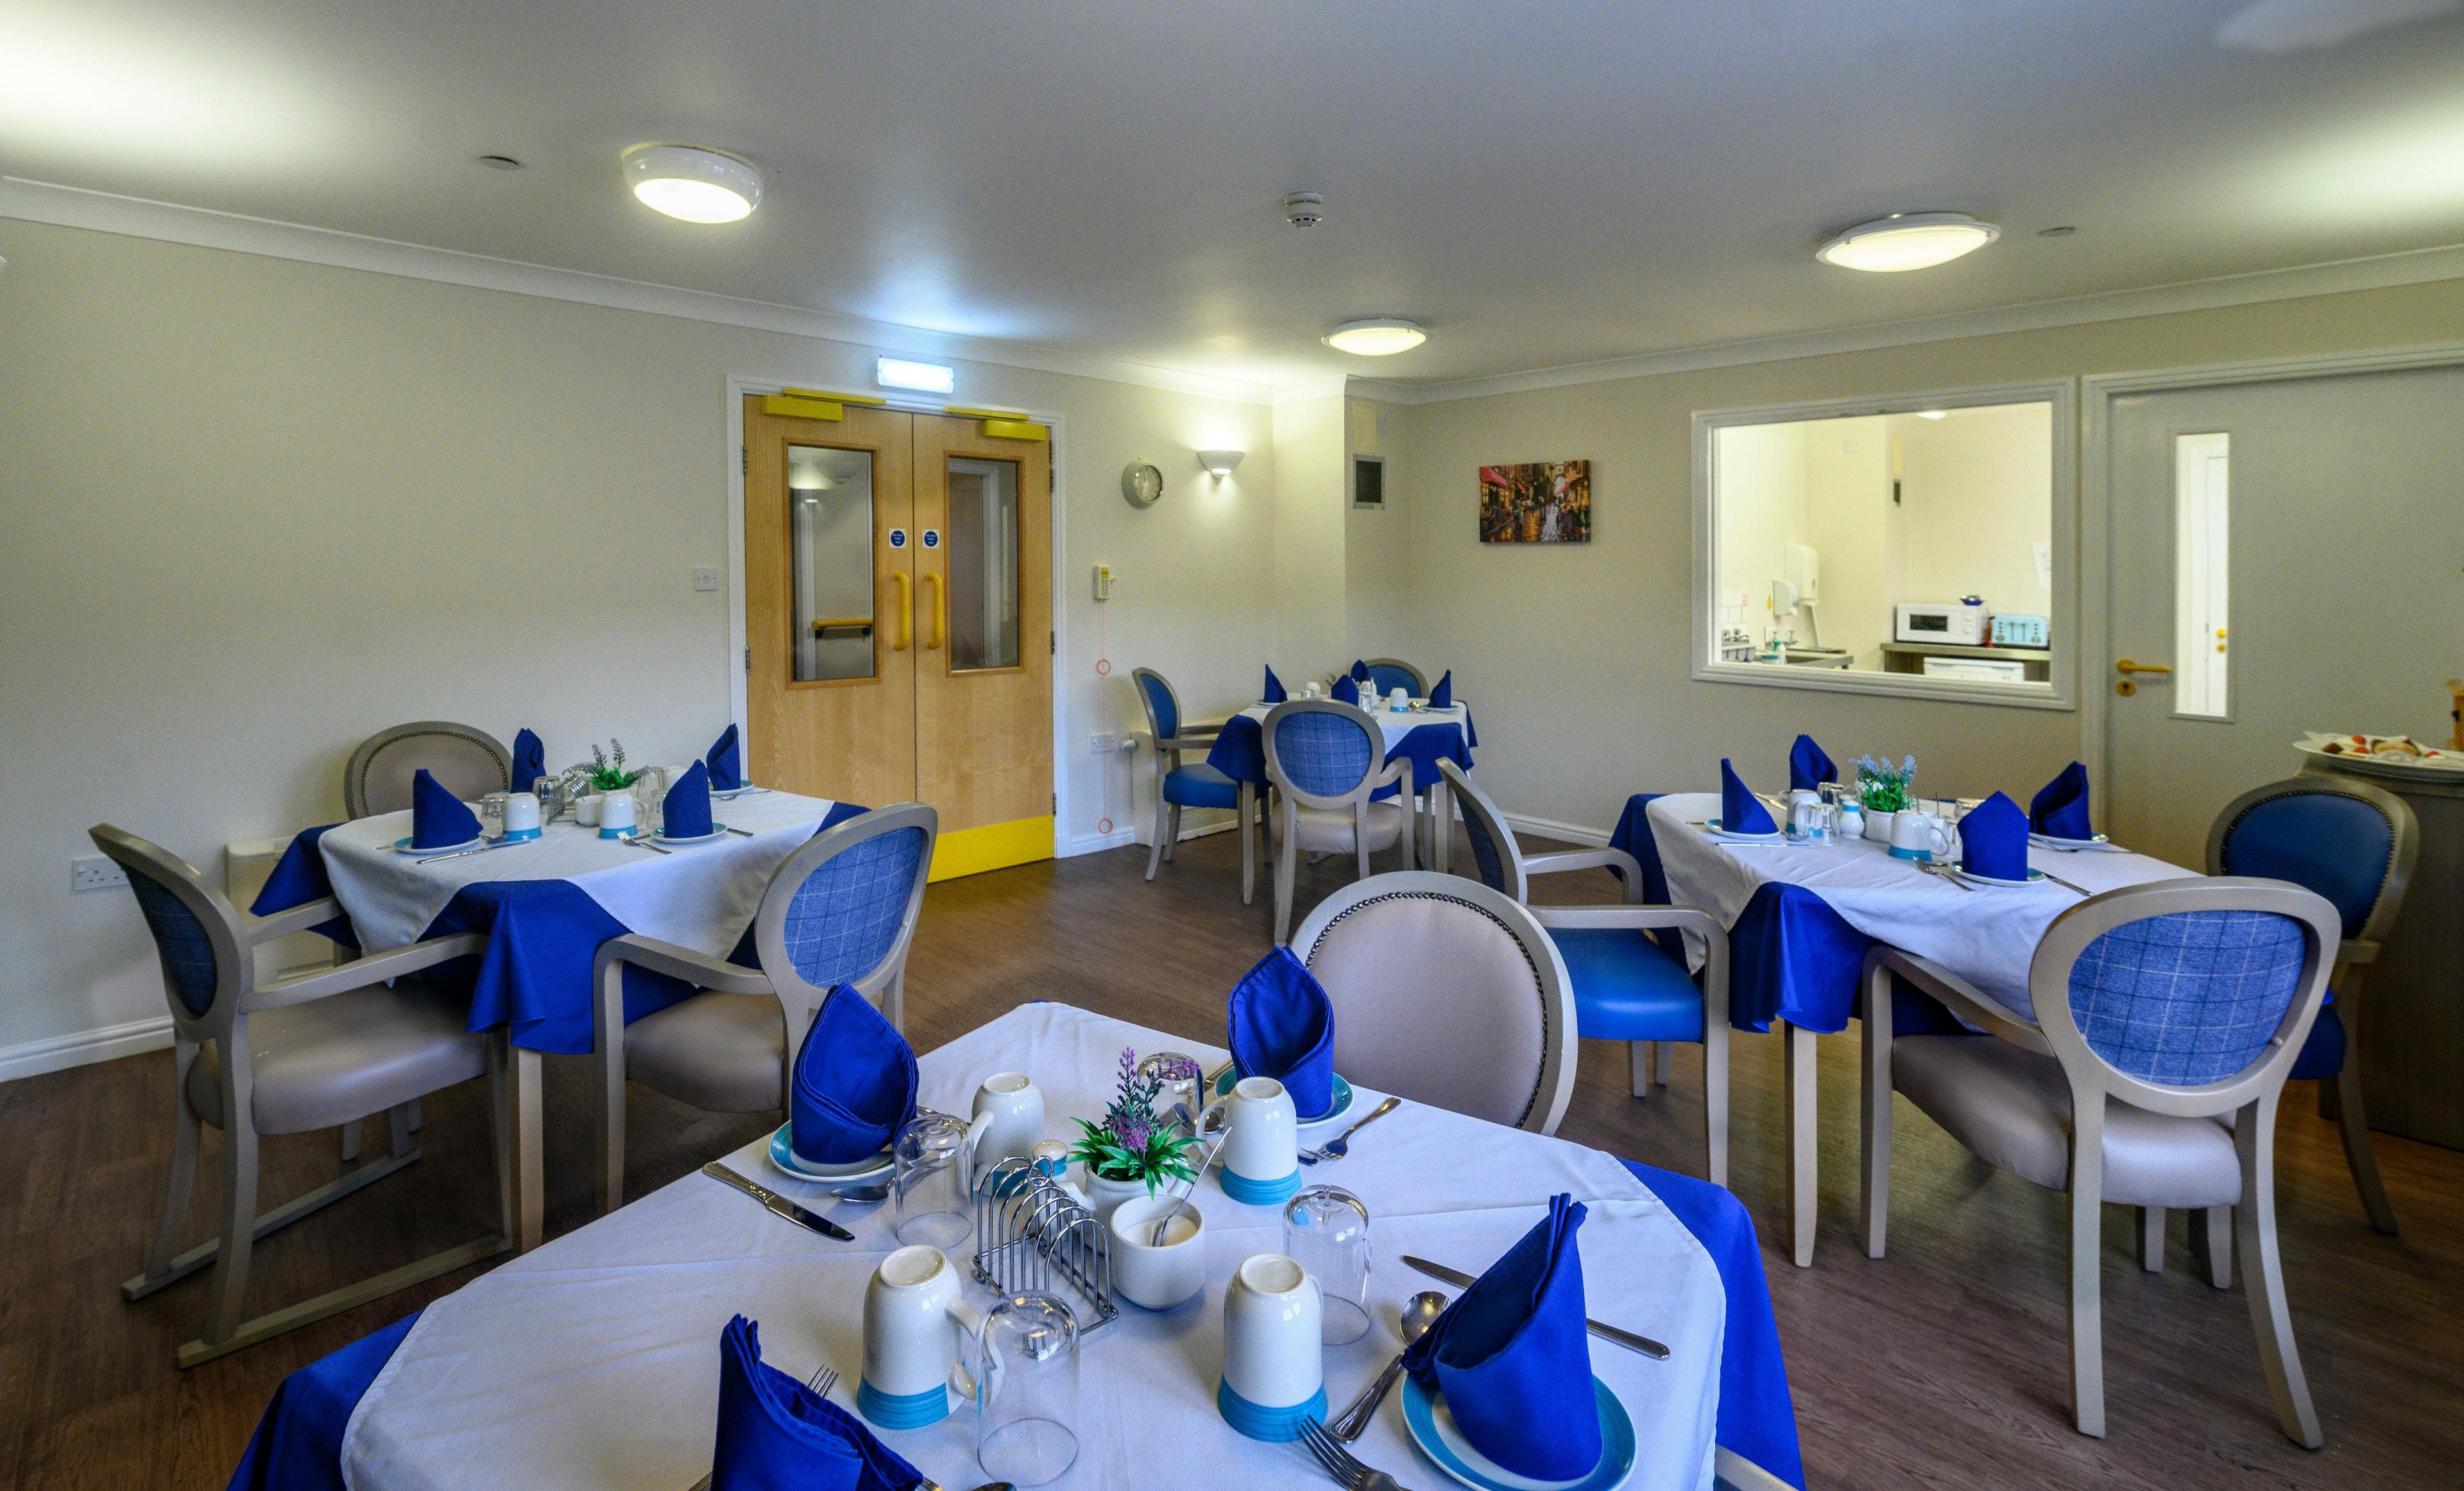 Dining Room of Caledonian Court Care Home in Falkirk, Scotland